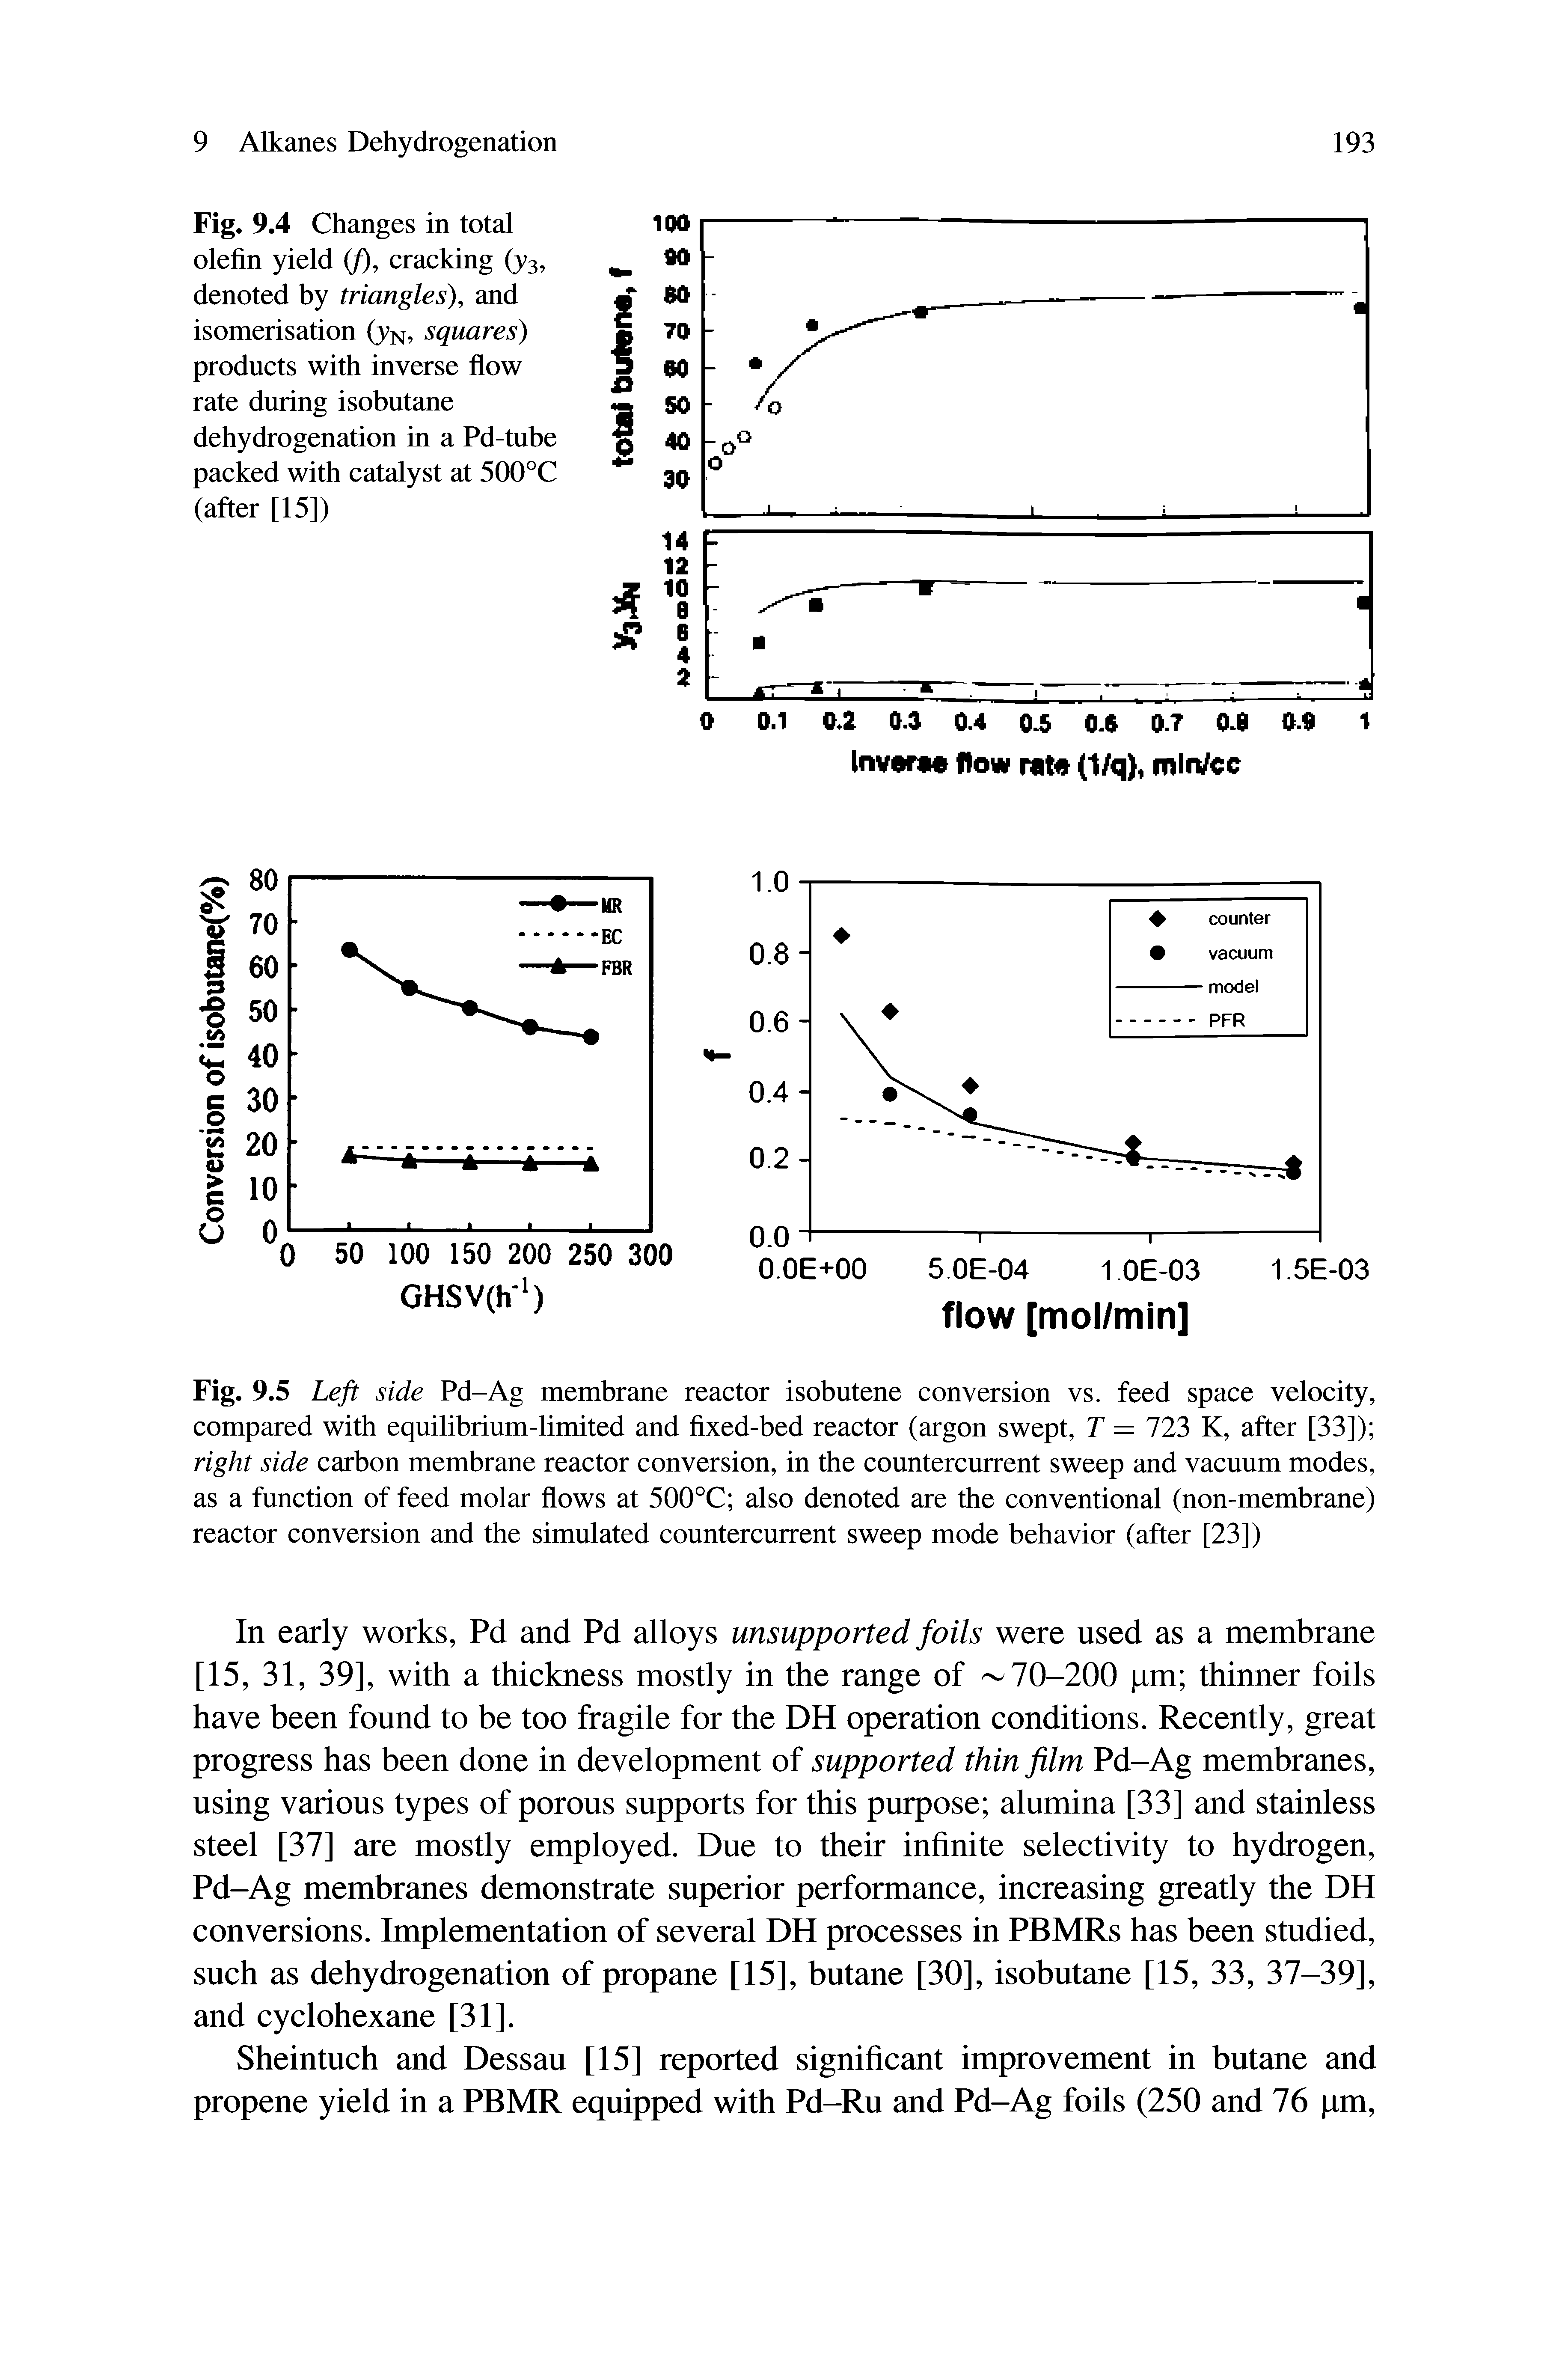 Fig. 9.5 Left side Pd-Ag membrane reactor isobutene conversion vs. feed space velocity, compared with equilibrium-limited and fixed-bed reactor (argon swept, T = 723 K, after [33]) right side carbon membrane reactor conversion, in the countercurrent sweep and vacuum modes, as a function of feed molar flows at 500°C also denoted are the conventional (non-membrane) reactor conversion and the simulated countercurrent sweep mode behavior (after [23])...